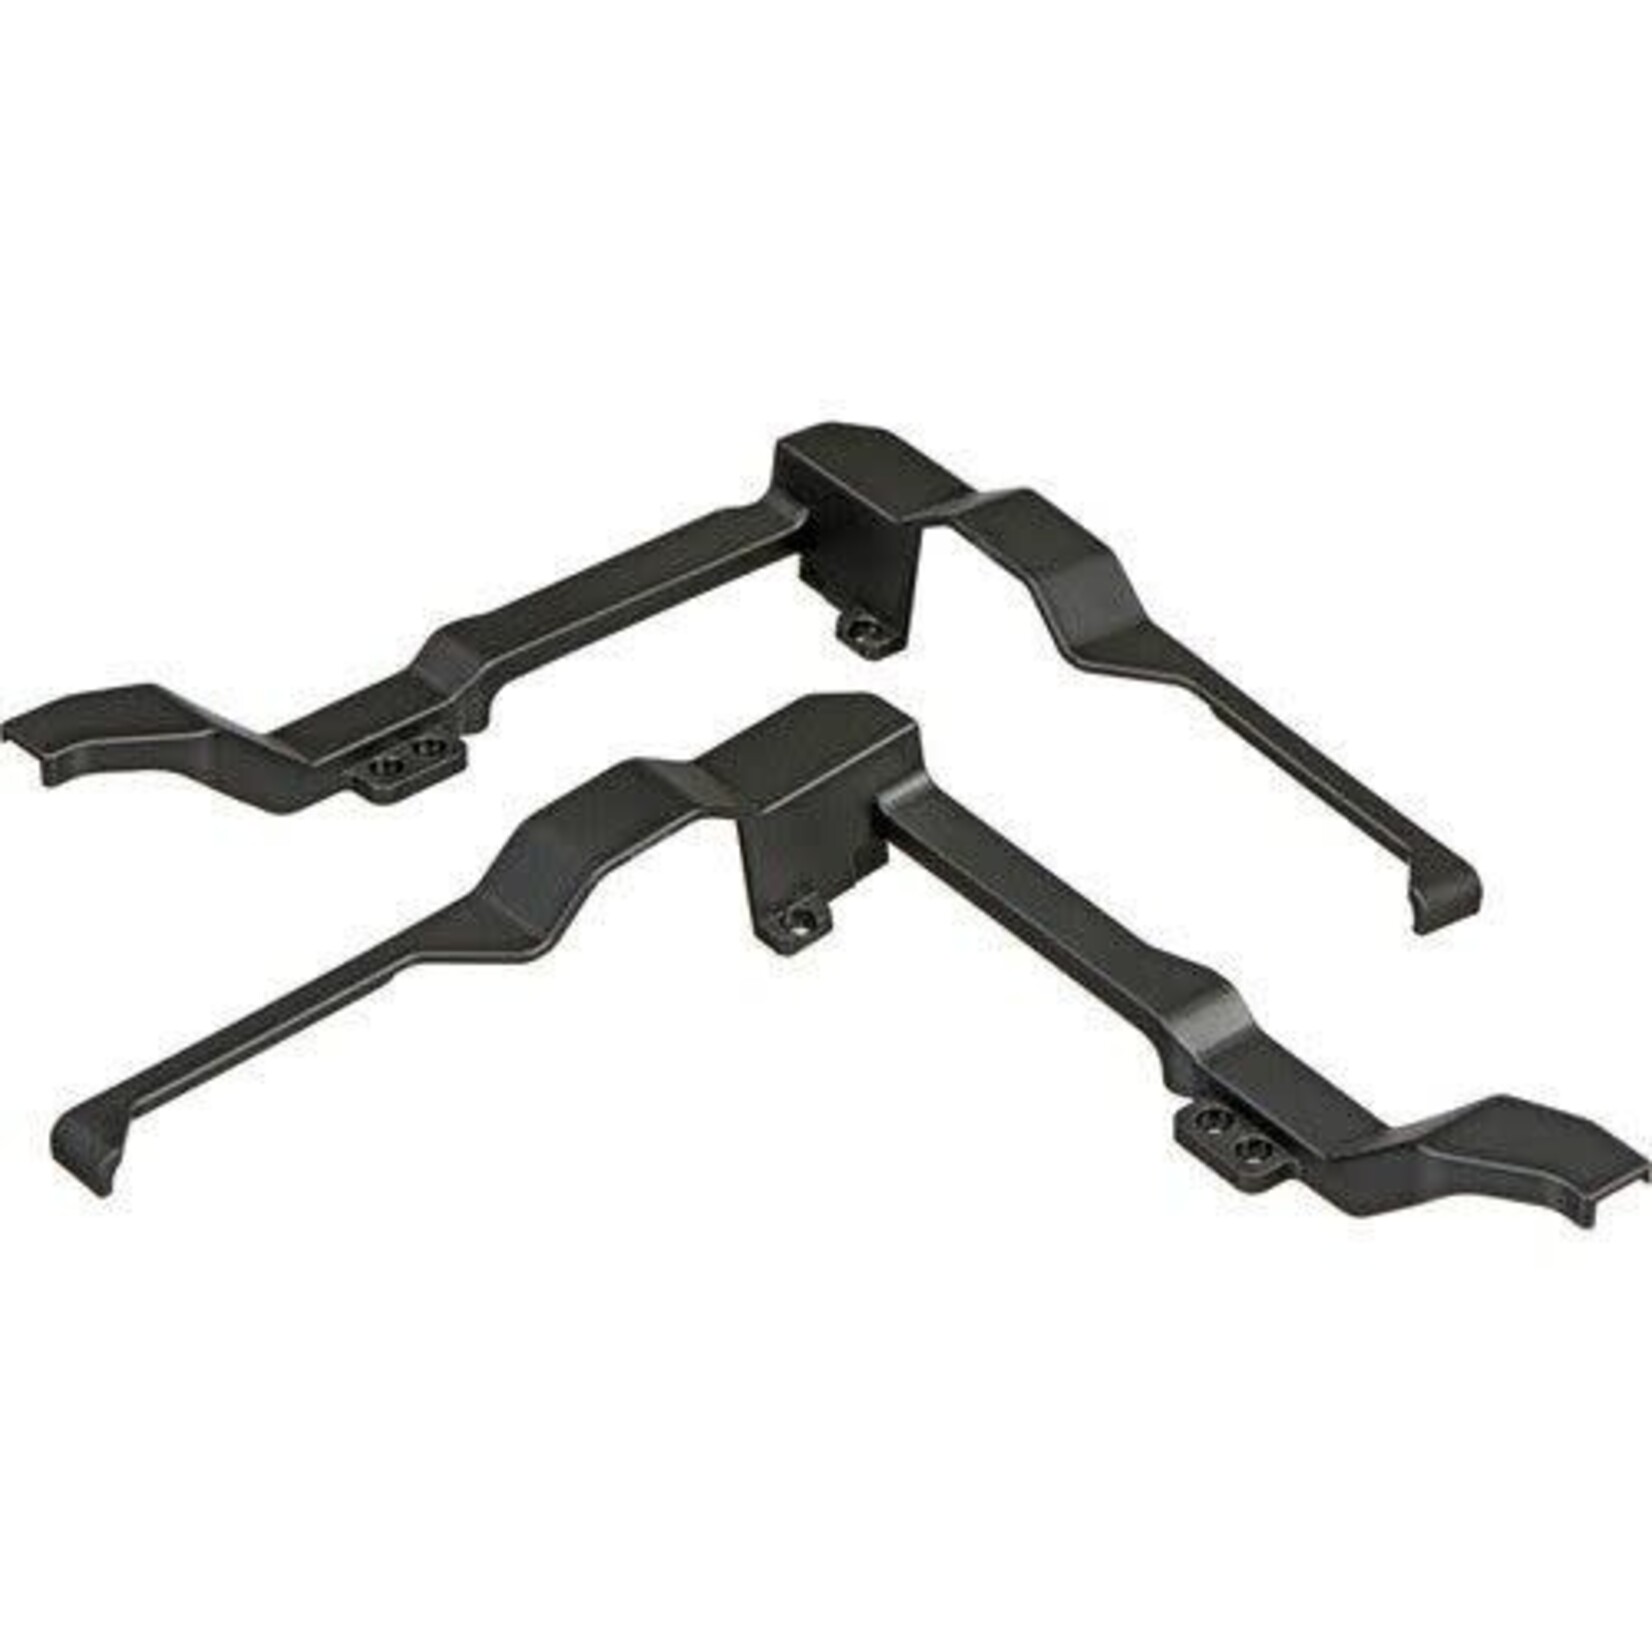 DJI DJIPart43 DJI Inspire 1 Left and Right Cable Clamp Part 43